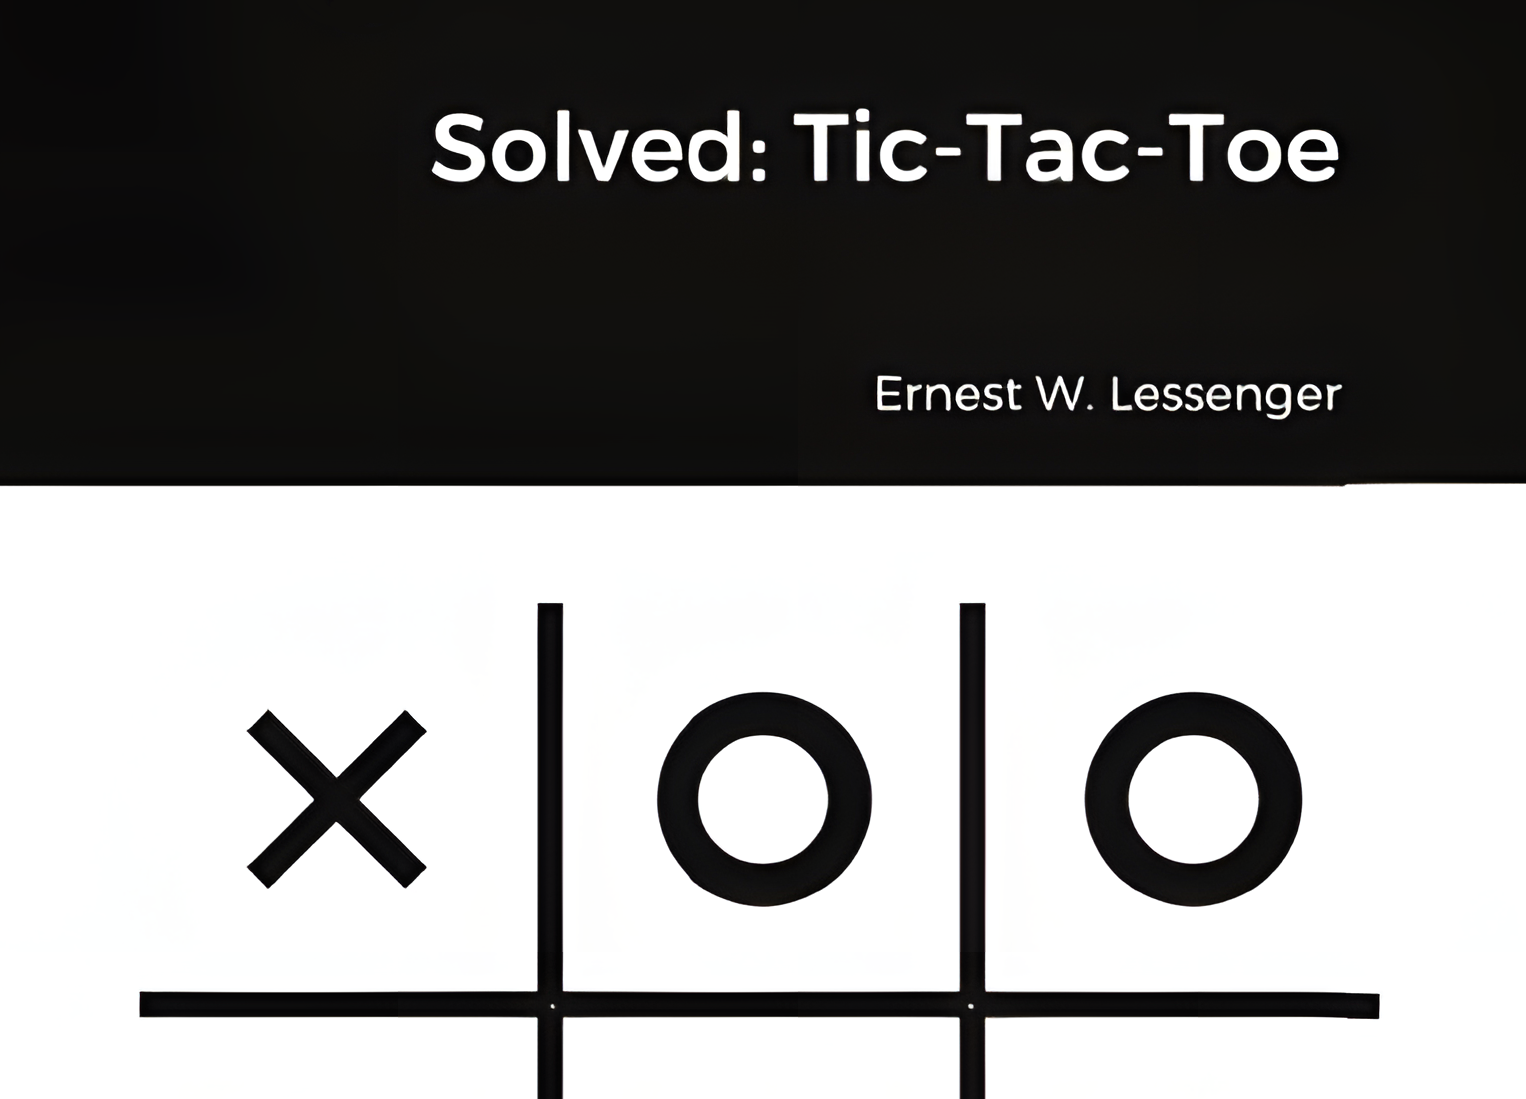 A picture of the book cover: A tic-tac-toe board